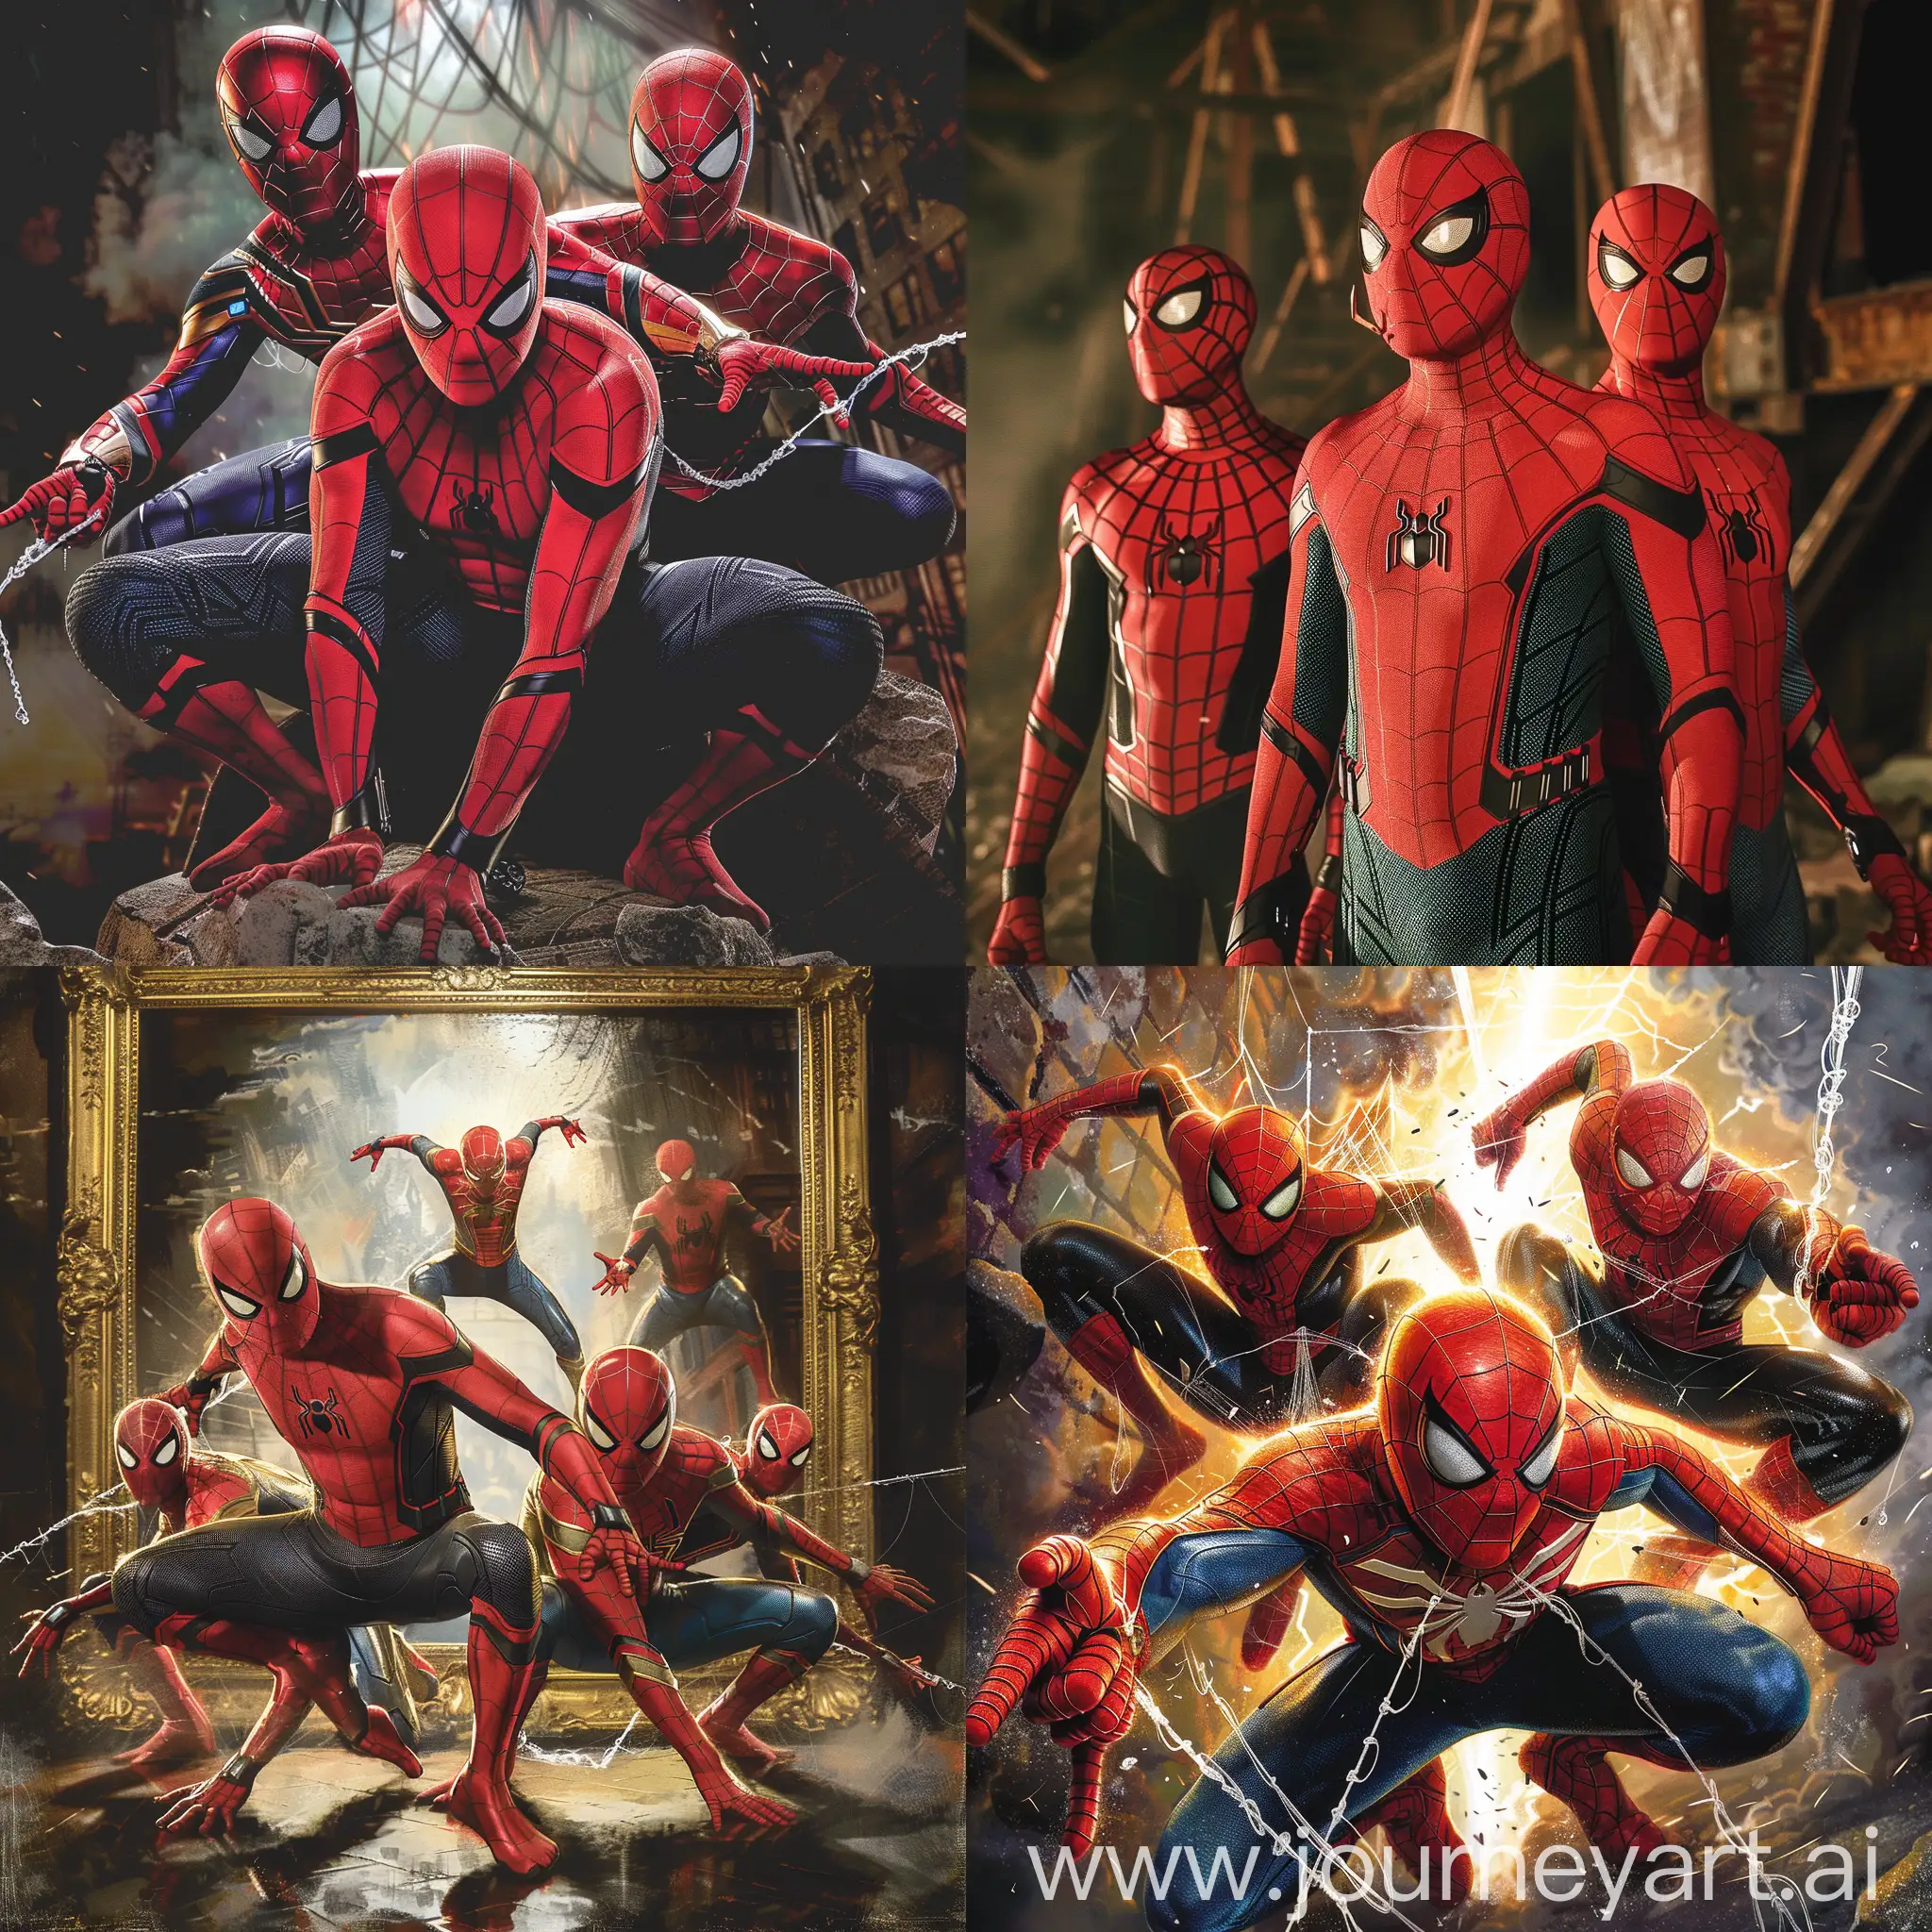 just give me a frame from spiderman no-way home with the 3 spidermen